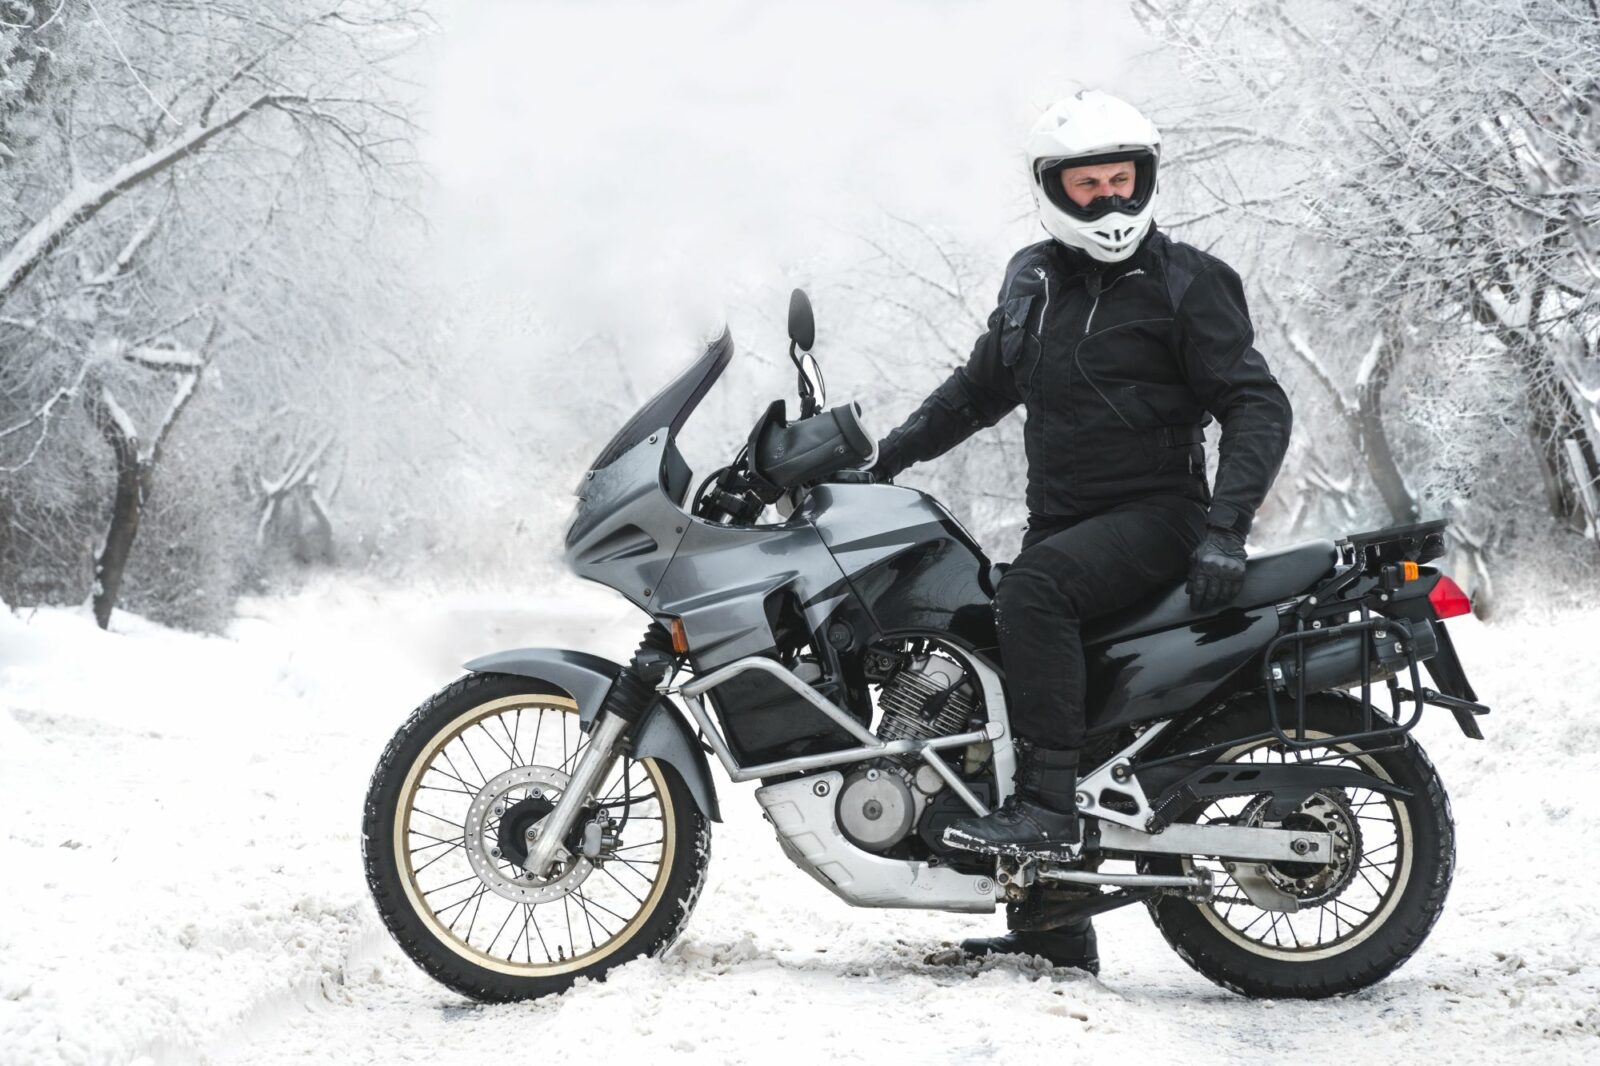 Top Riding Tips to Take Care of Your Motorcycle in Winter